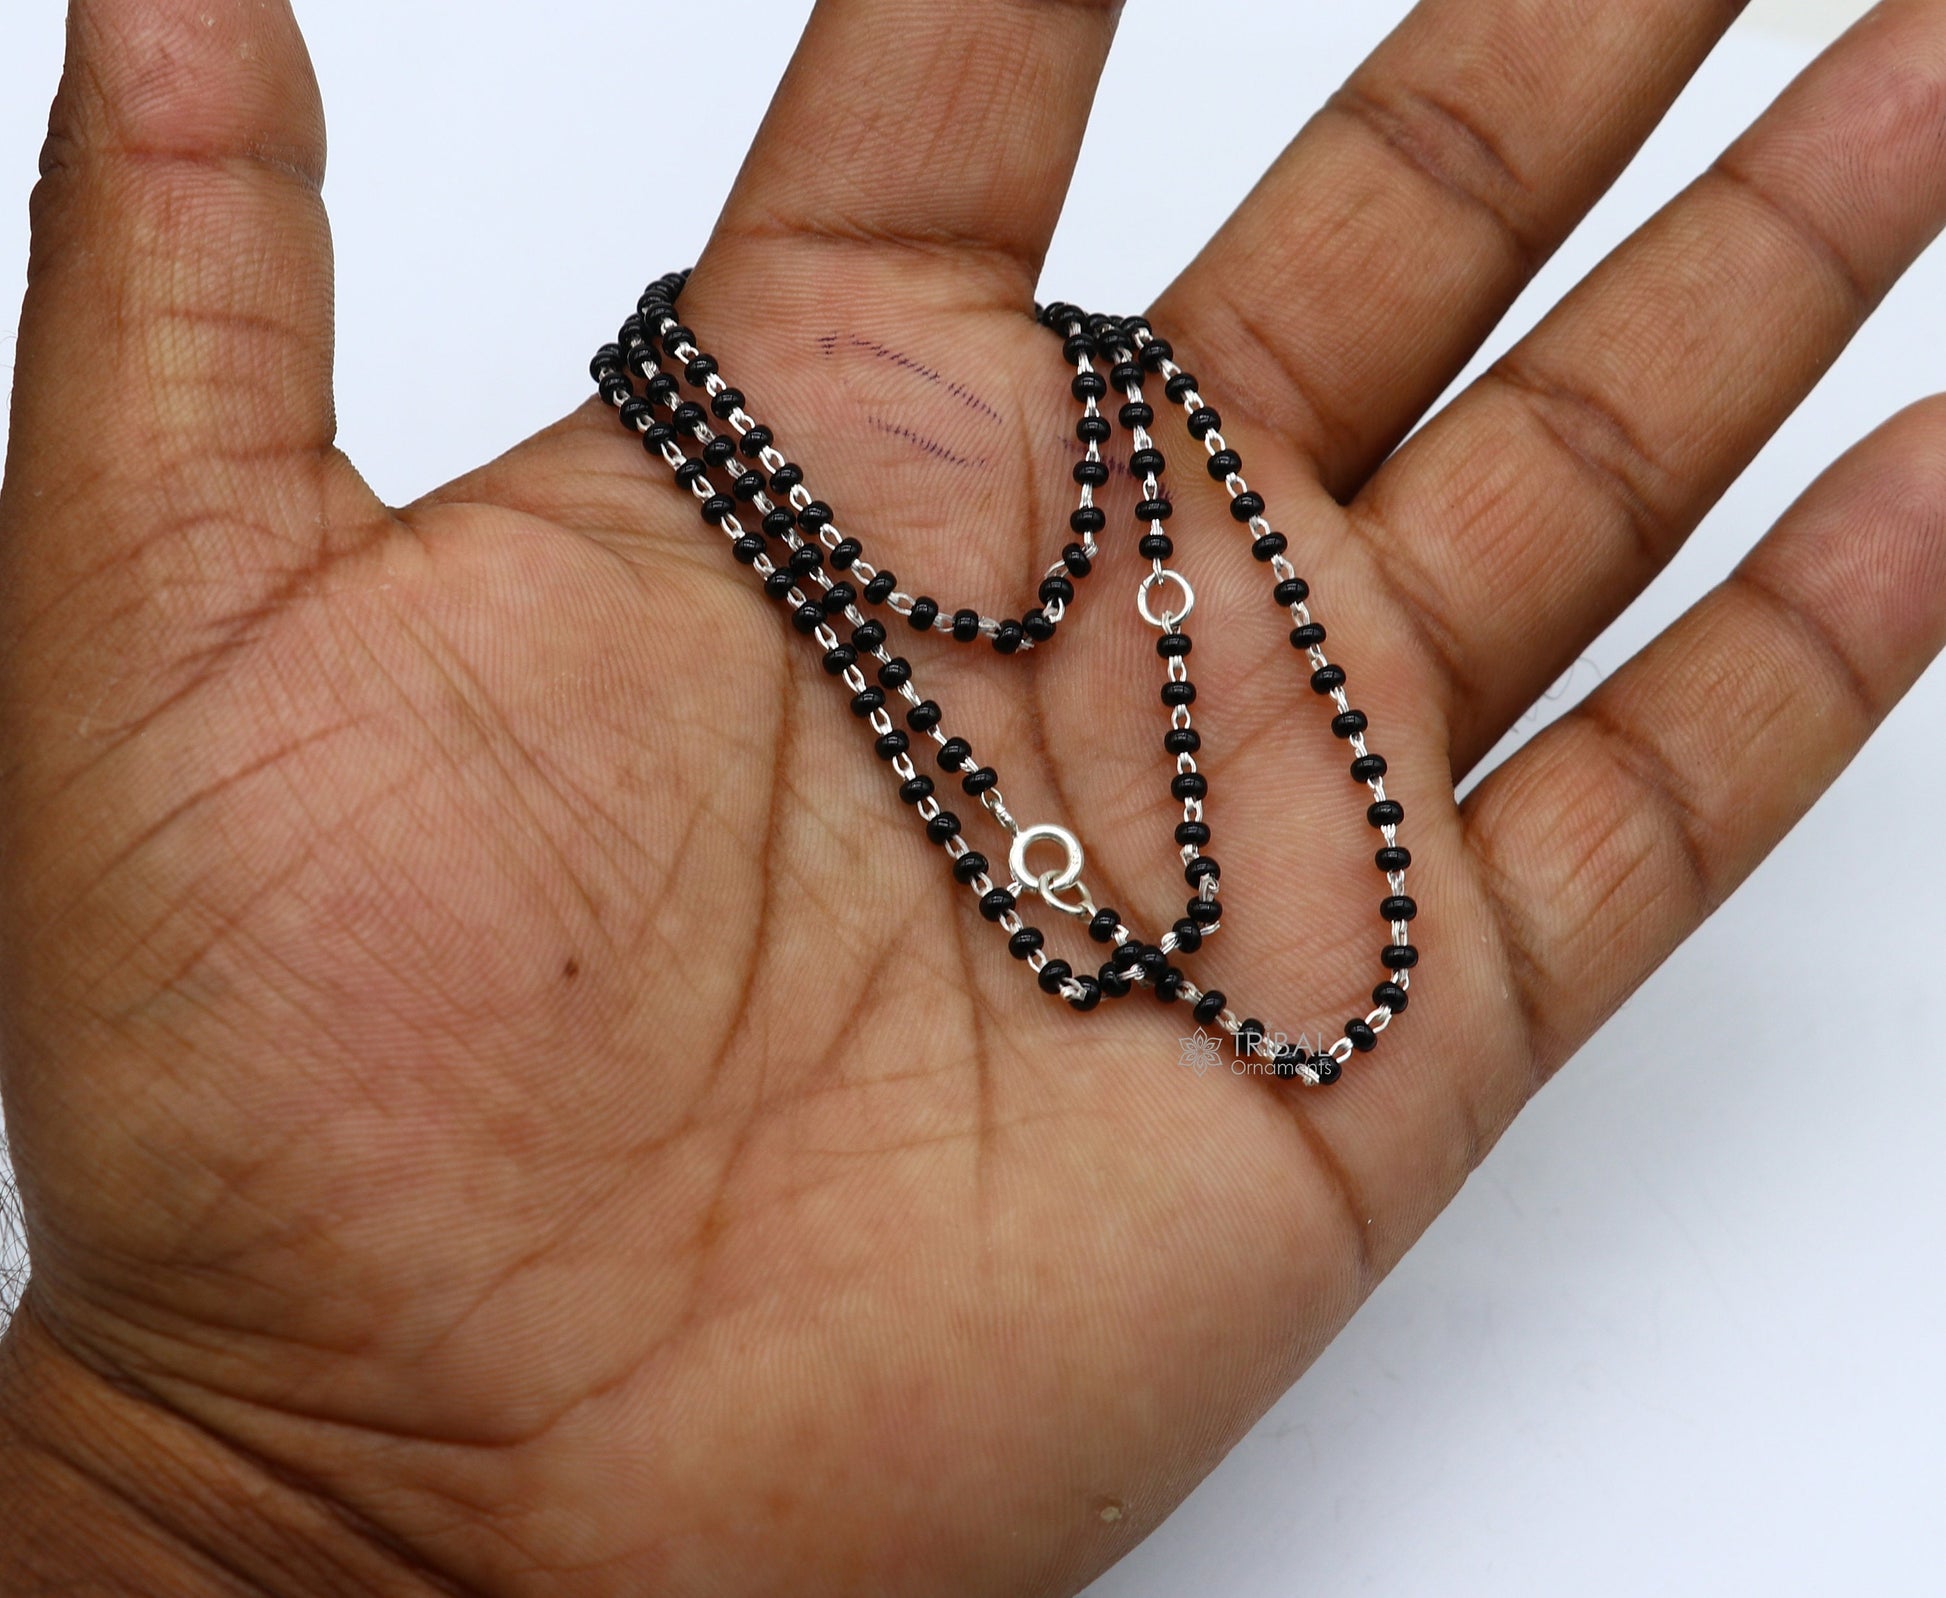 925 sterling silver 2.2mm black beads chain, vintage Cultural fancy necklace, traditional style brides Mangalsutra chain India ch554 - TRIBAL ORNAMENTS